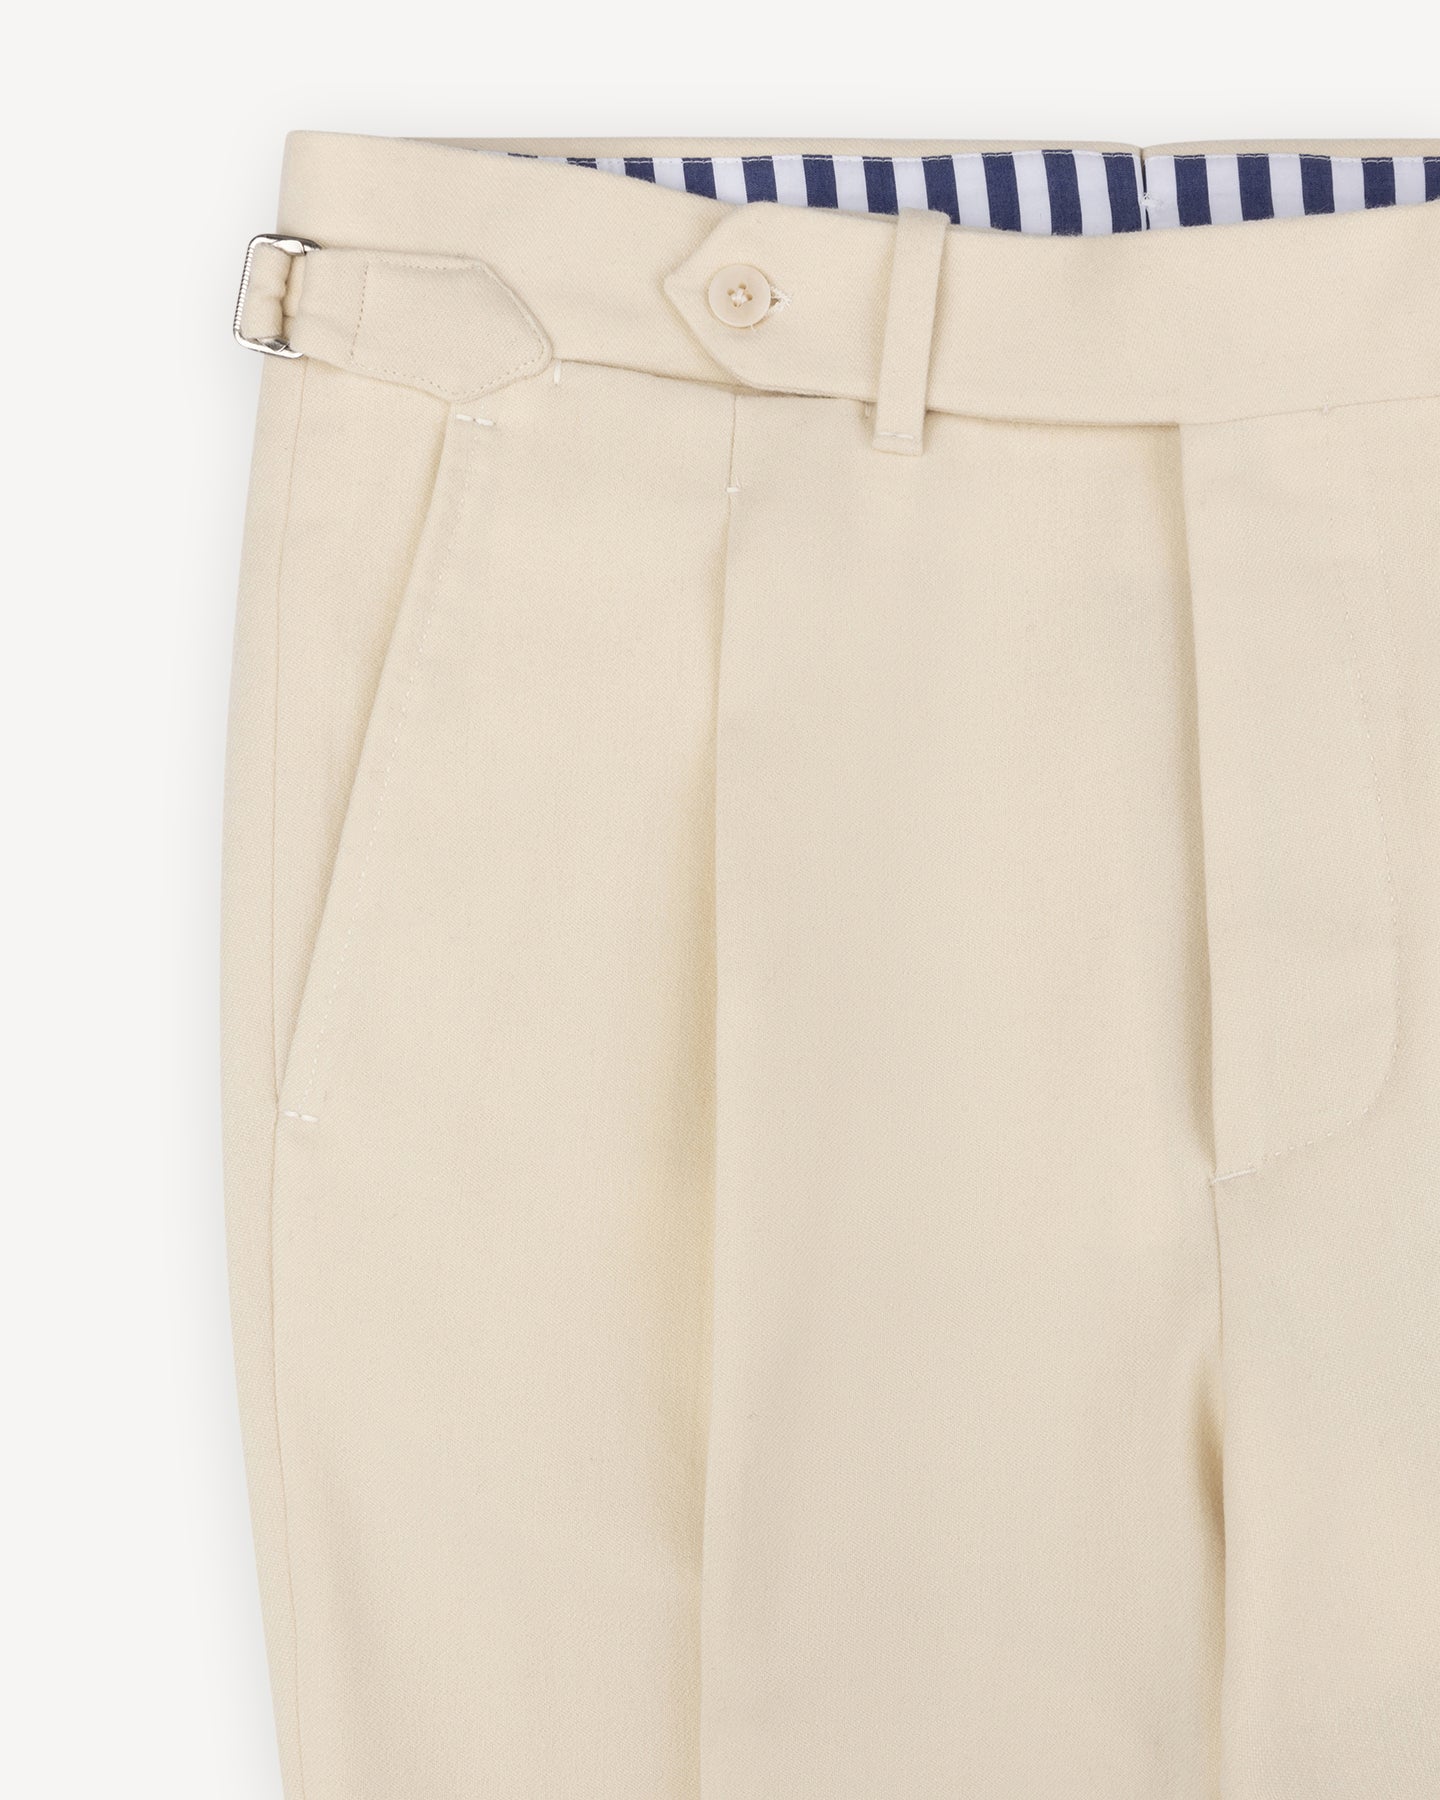 Single Pleat Fox Brothers Cricket Flannel Trousers